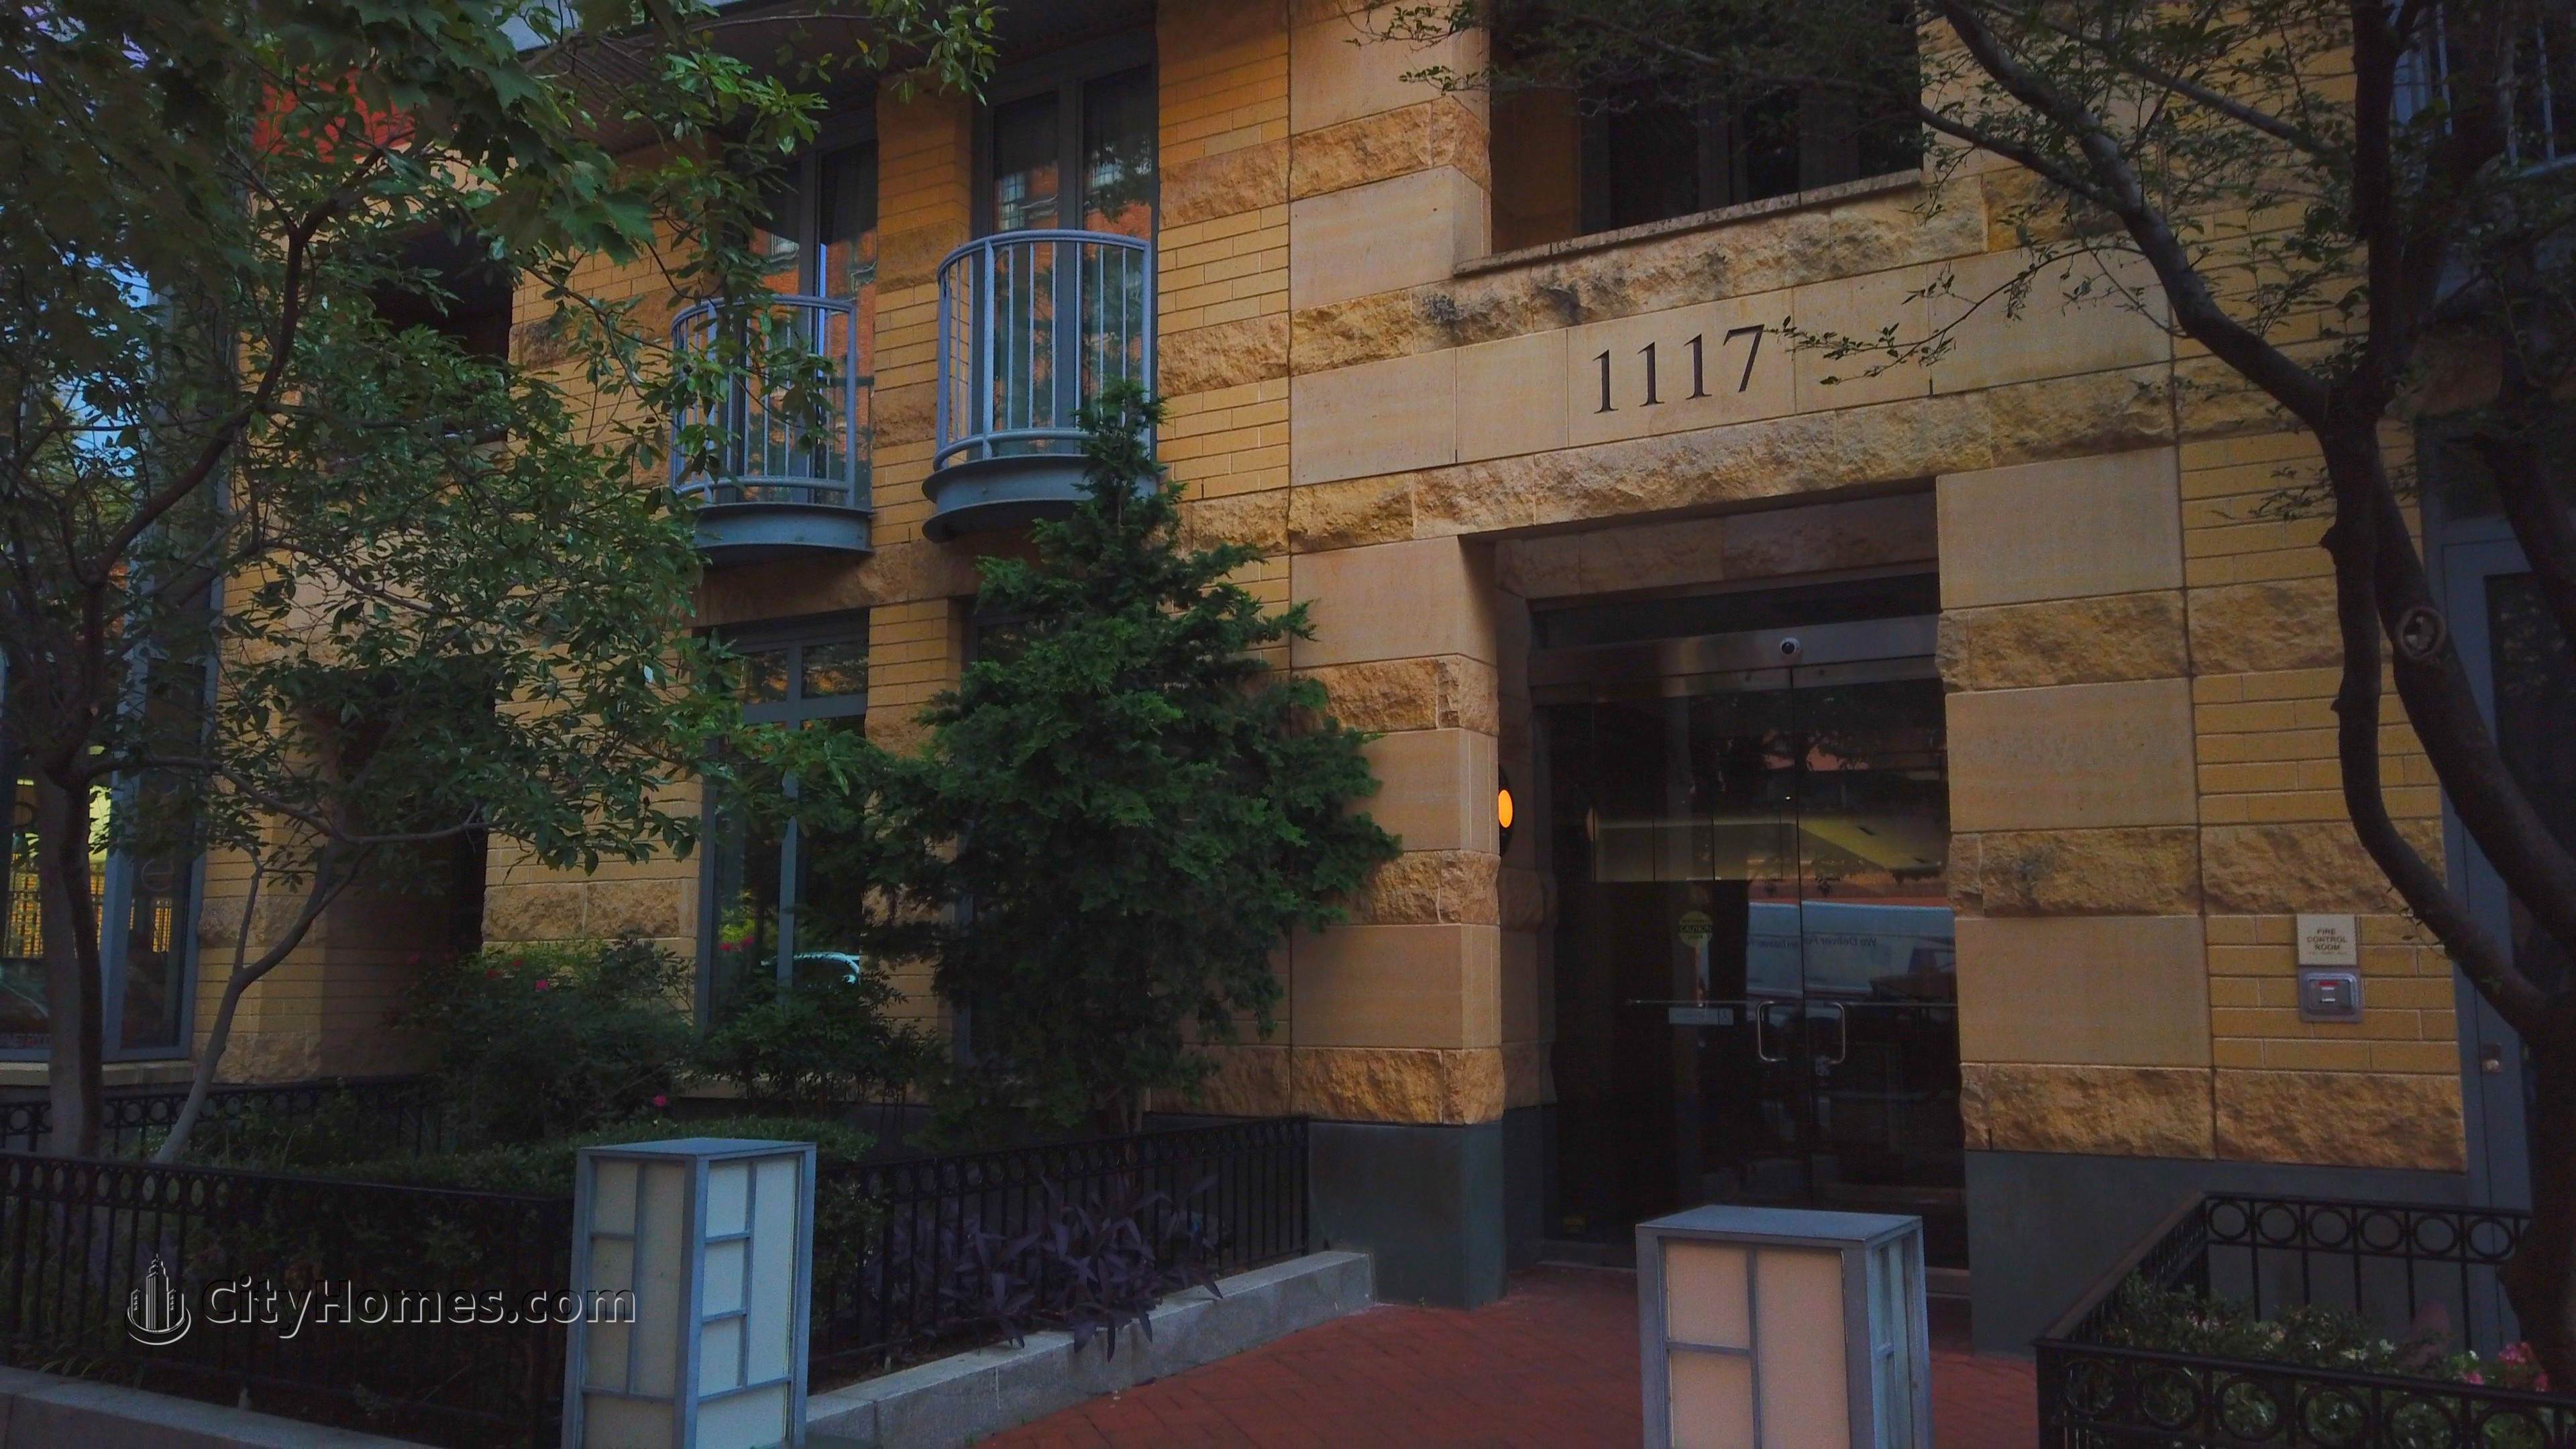 Quincy Court κτίριο σε 1117 10th St NW, Mount Vernon Square, Washington, DC 20001